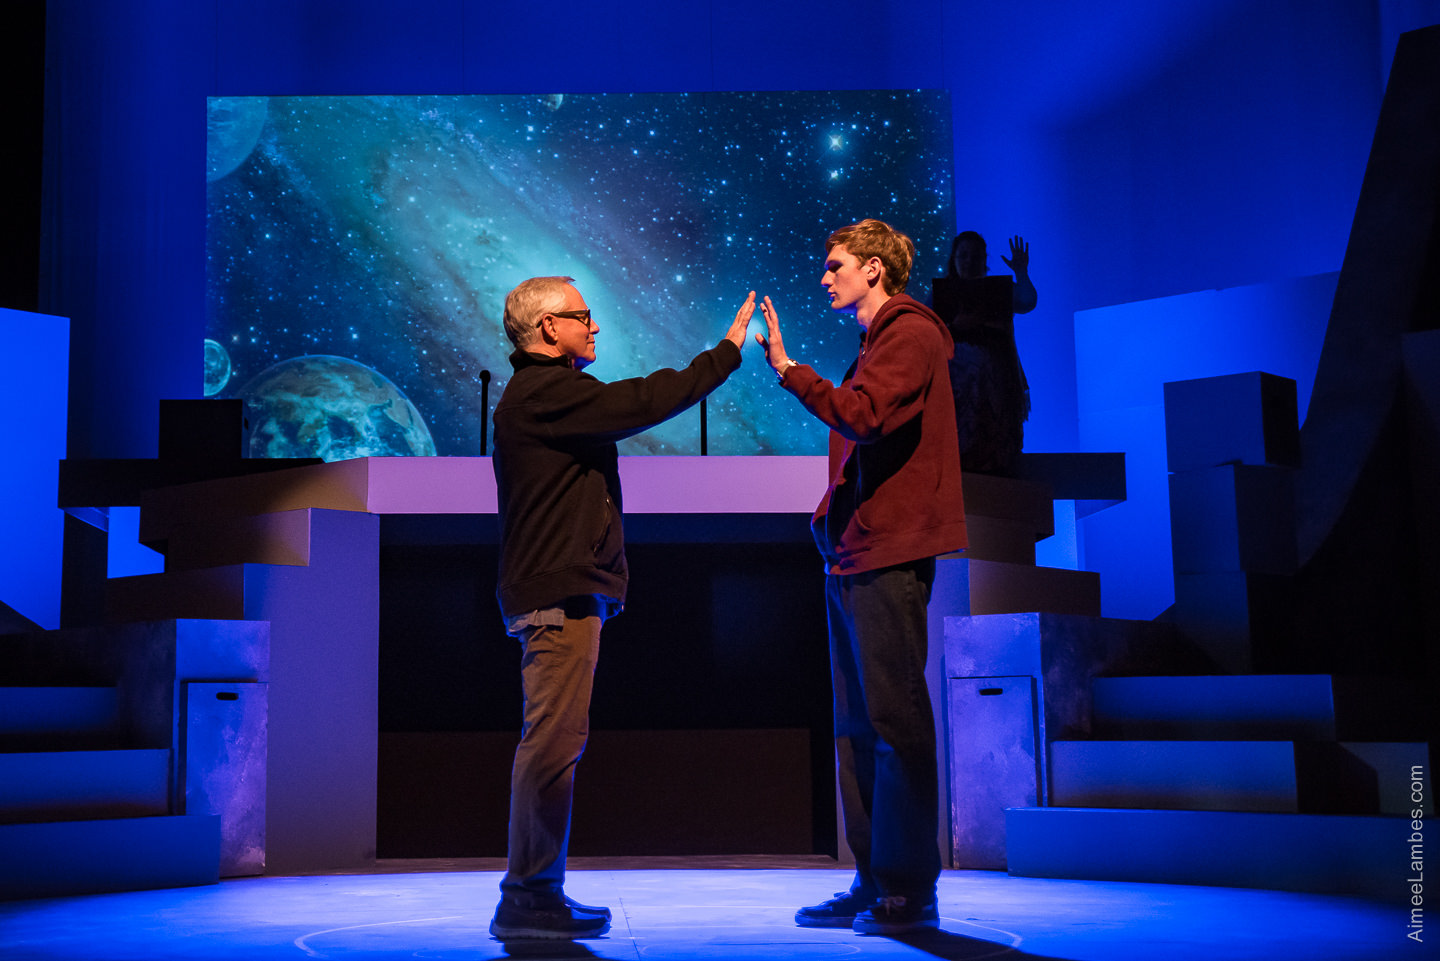 The Curious Incident of the Dog in the Night-Time
September 6 to 21, 2018
330-836-2626 or www.WeathervanePlayhouse.com
Photo courtesy of www.aimeelambes.com